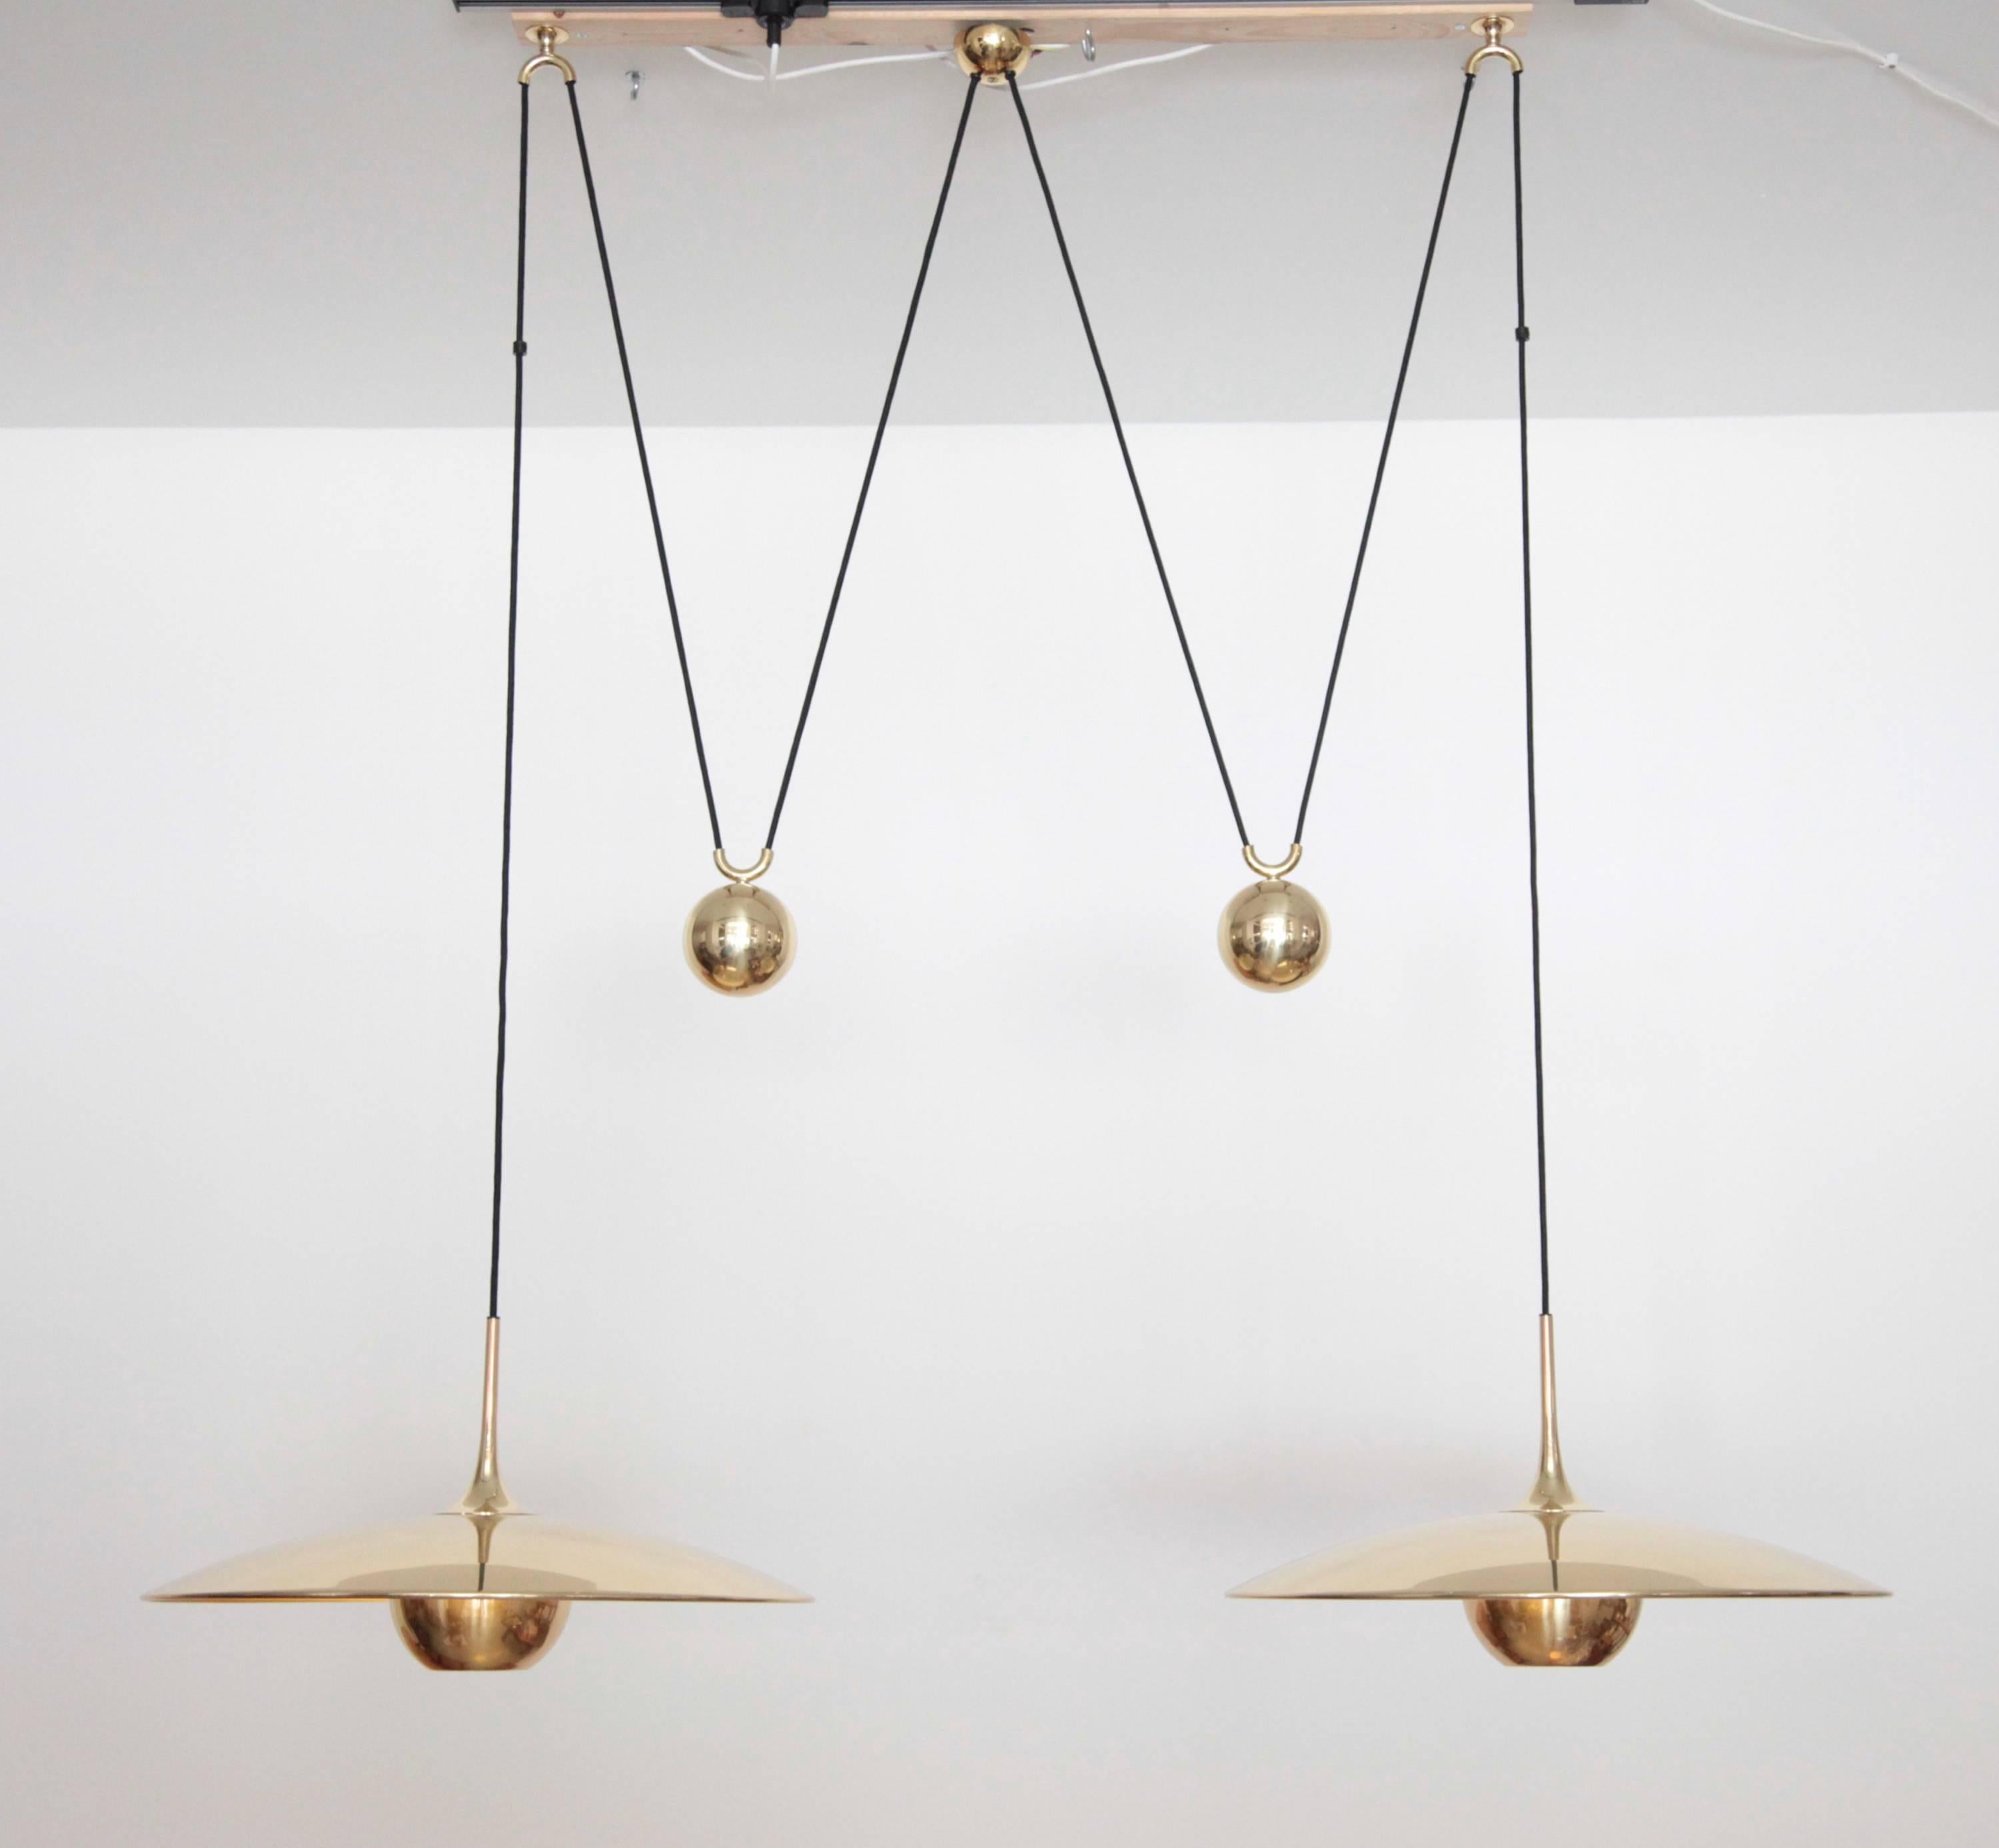 Brass Florian Schulz Double Onos 55 Pendant Lamp with Side Counter Weights